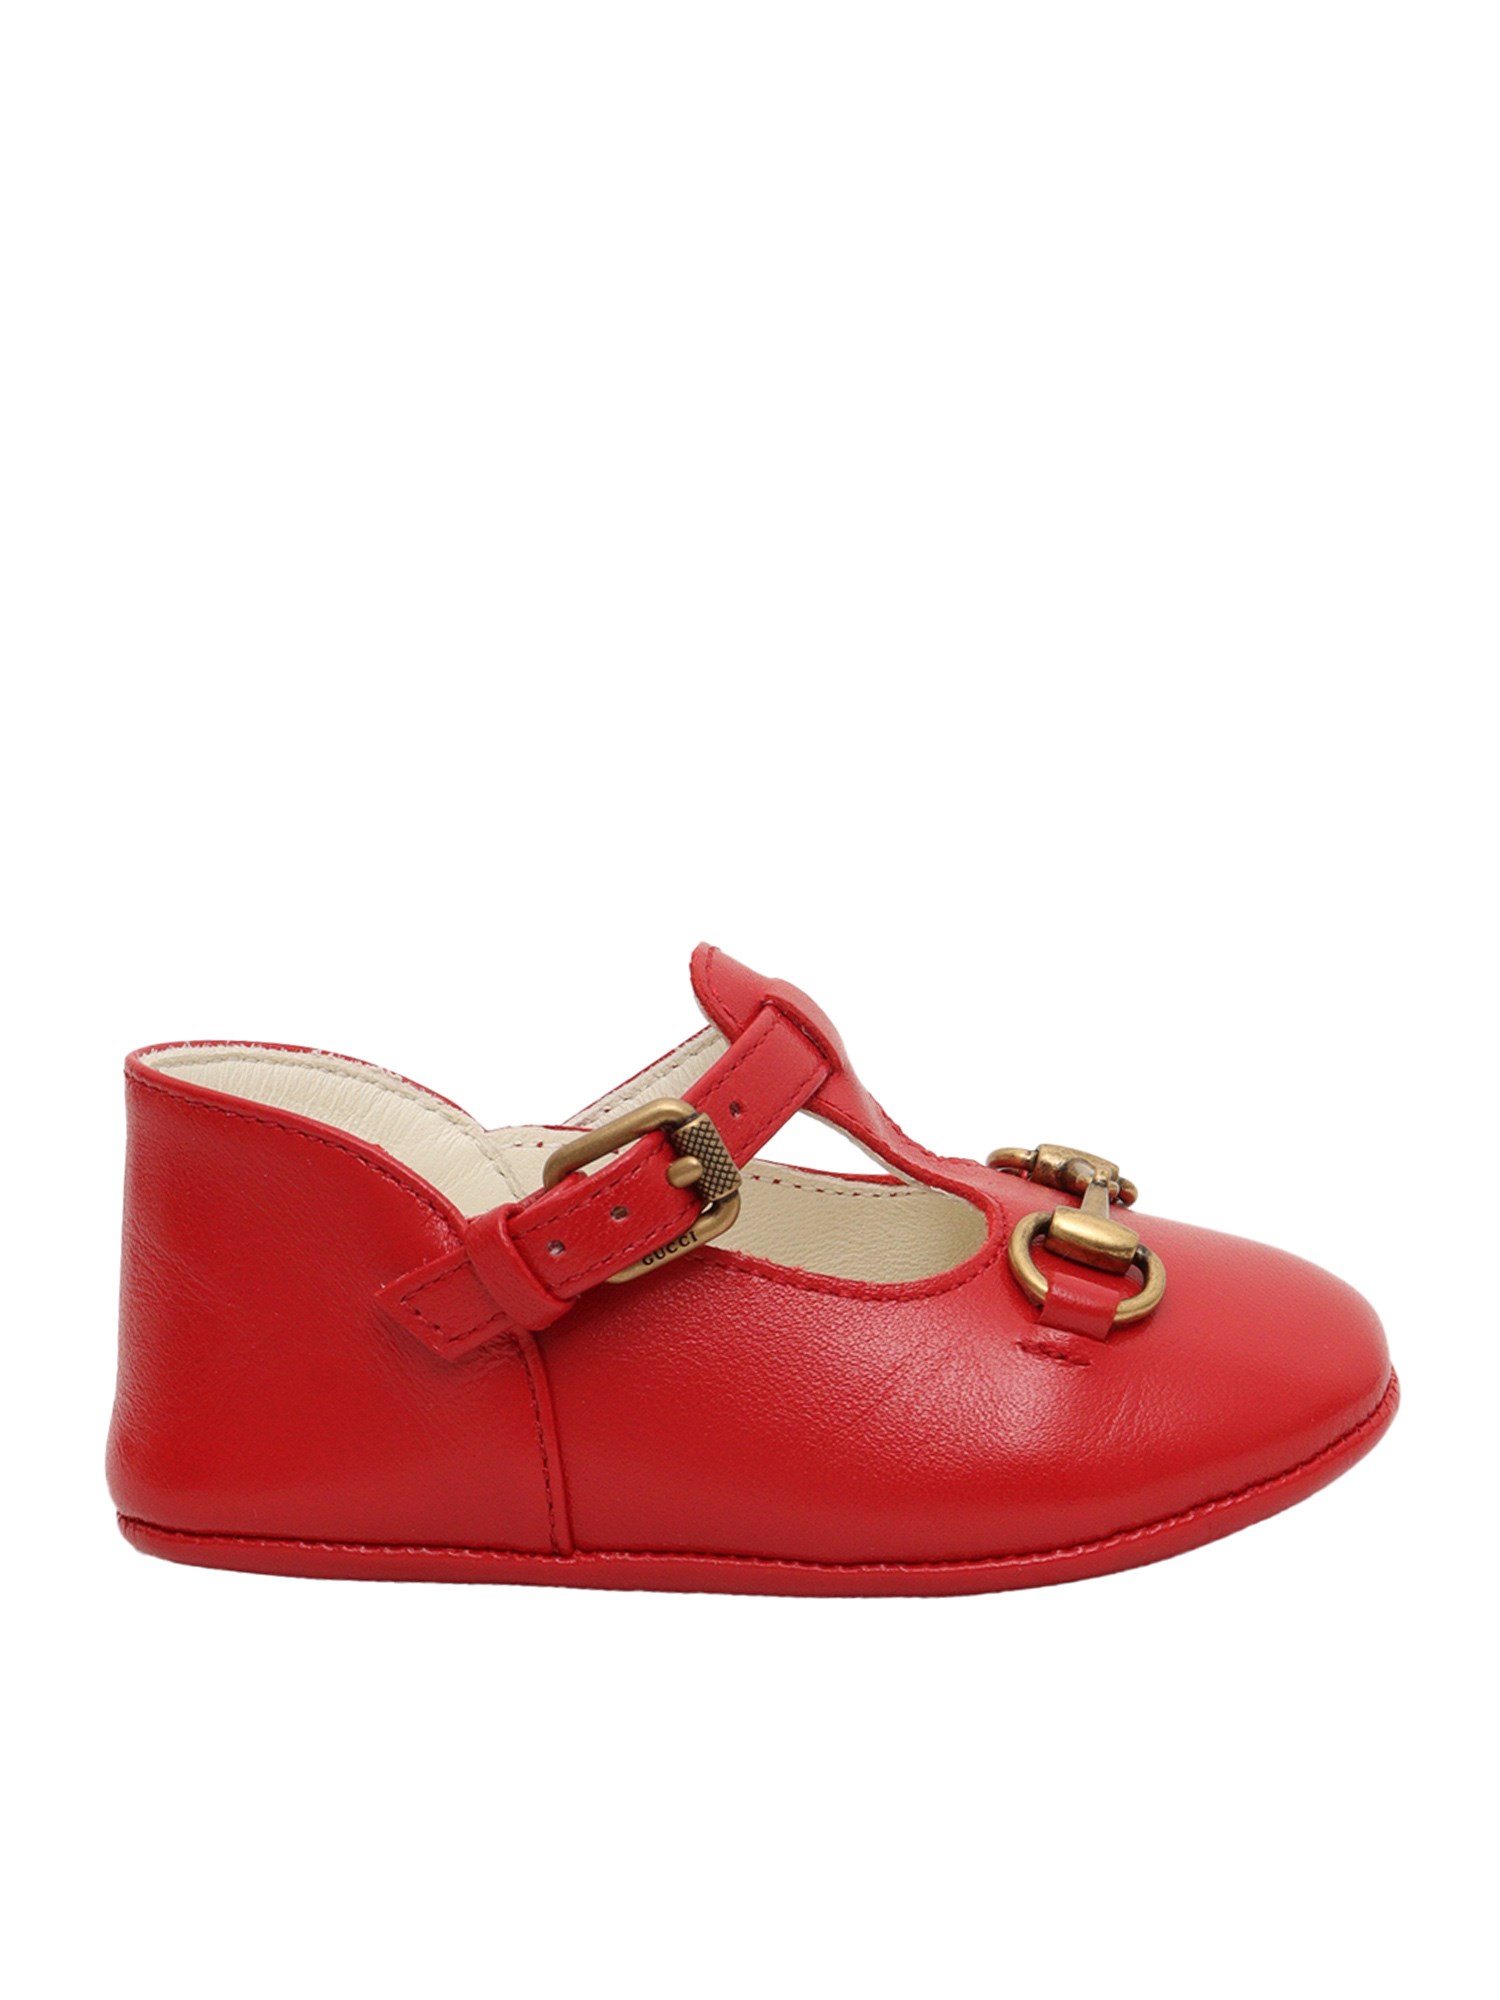 Gucci Horsebit Shoes In Red